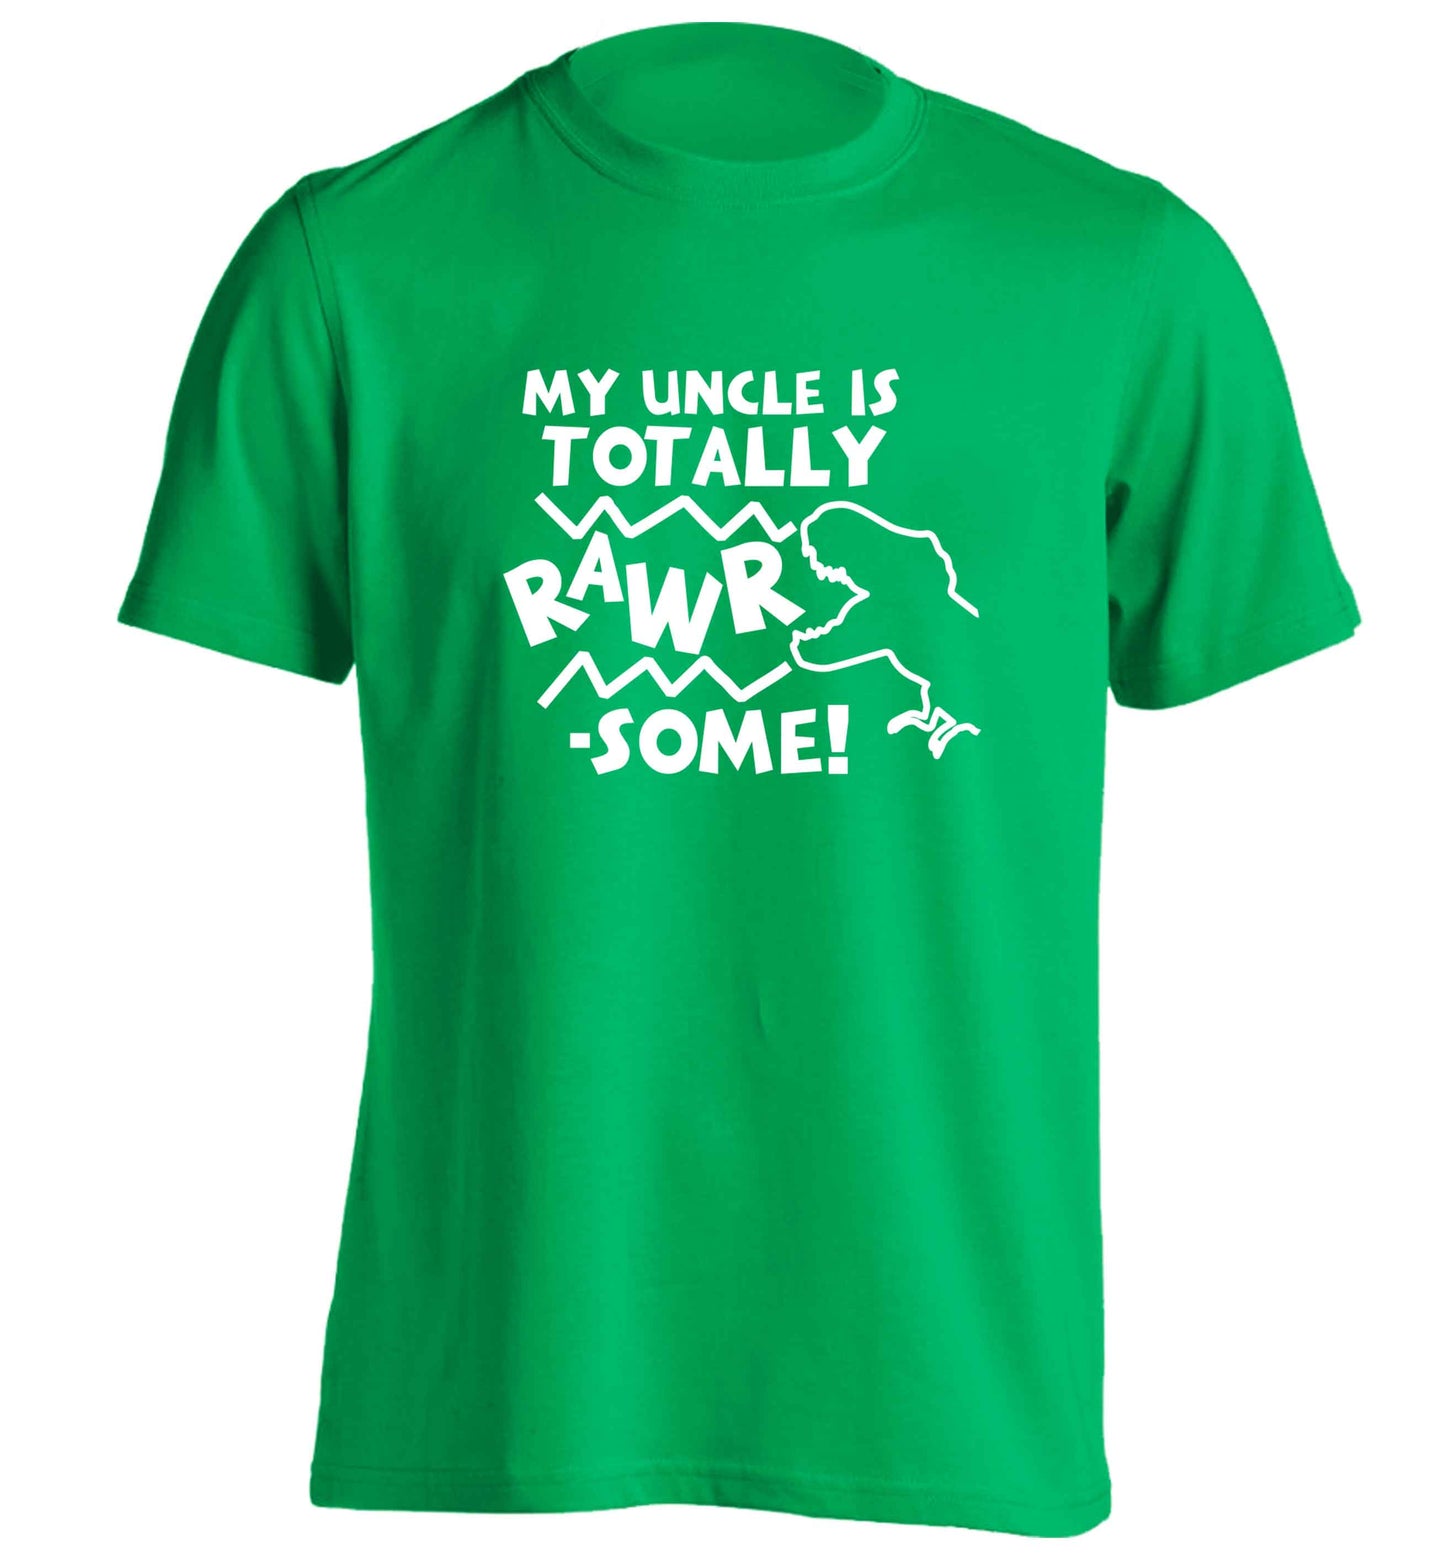 My uncle is totally rawrsome adults unisex green Tshirt small